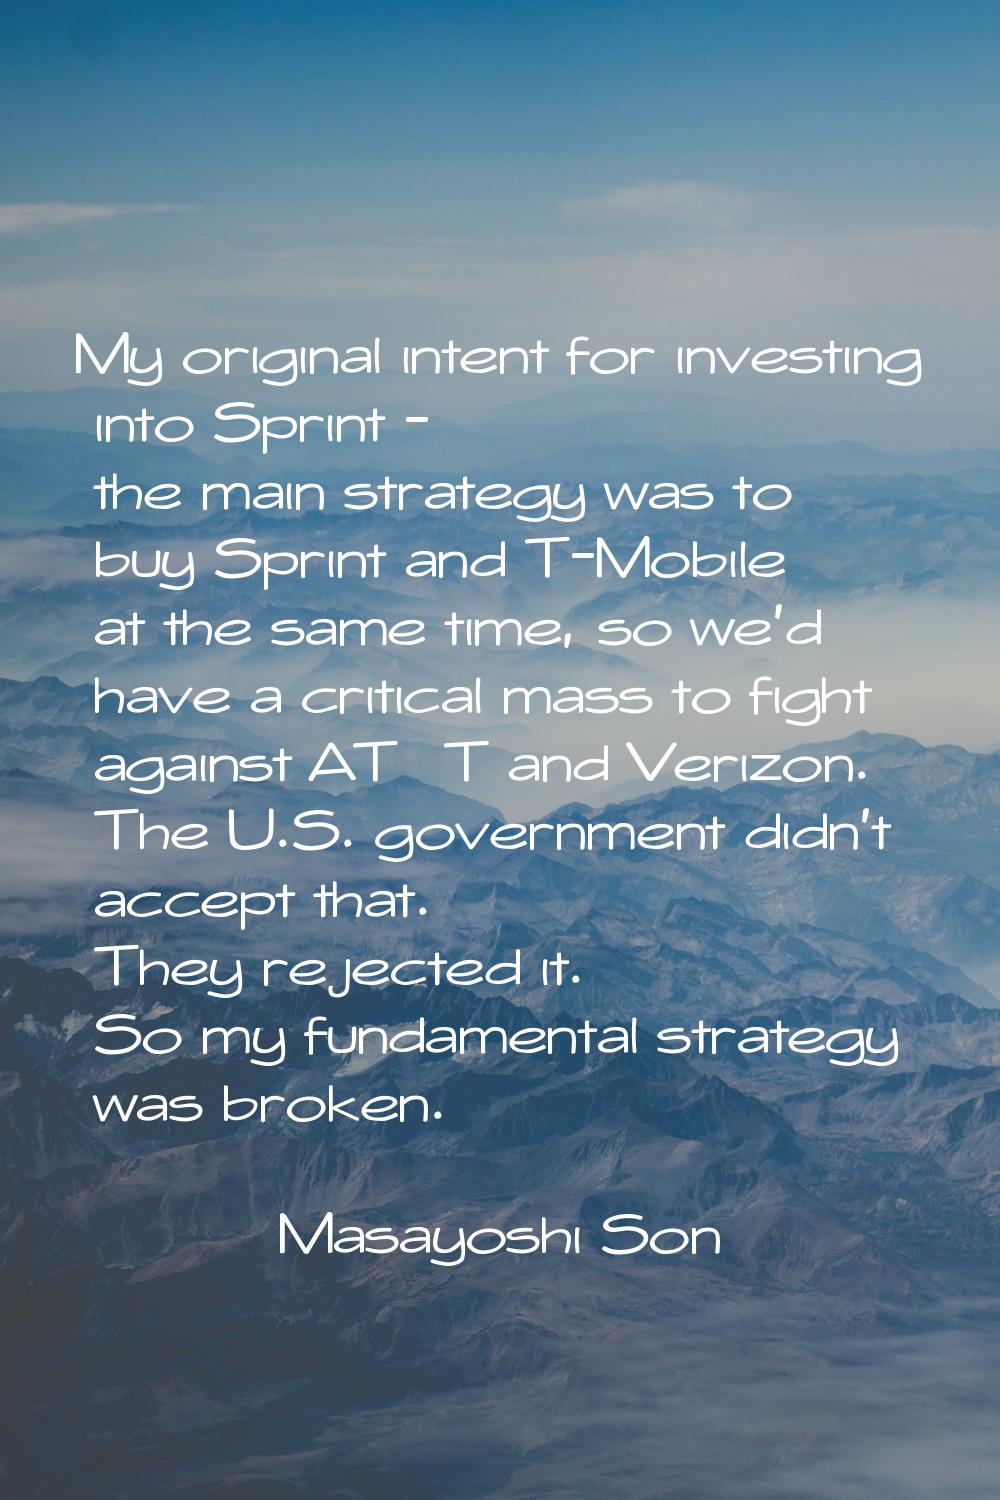 My original intent for investing into Sprint - the main strategy was to buy Sprint and T-Mobile at 